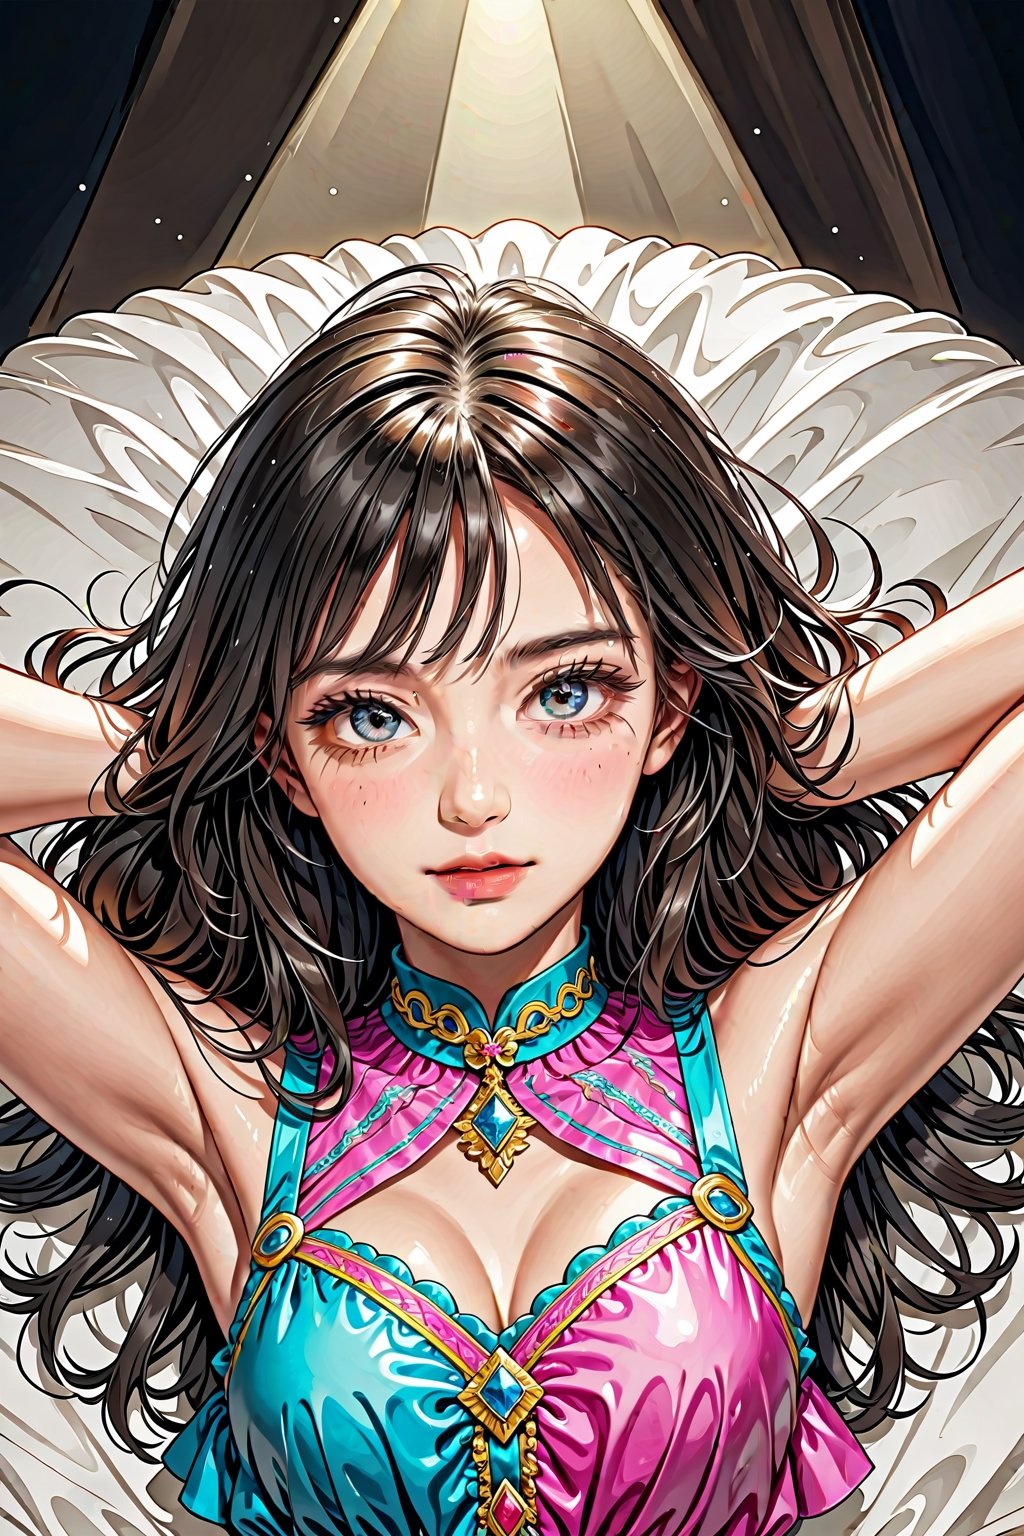 1girl-in-her-teens, irresistible-bishoujo, no-virgin-anymore, mix-of-natural-hair-styles, realistic-detailed-skin, (((Ultra-HD-details, Ultra-HD-detailed, Ultra-HD-realistic))), remarkable-colors, Cropped frilled shirt worn with a flowy chiffon long skirt, mix-of-every-stripper-poses, lying-down, Sexy Pose, dreaming-pov, supporting-pose, (((relaxed))), cinematic-lighting, LinkGirl, Enhanced All, xxmixgirl,<lora:659095807385103906:1.0>